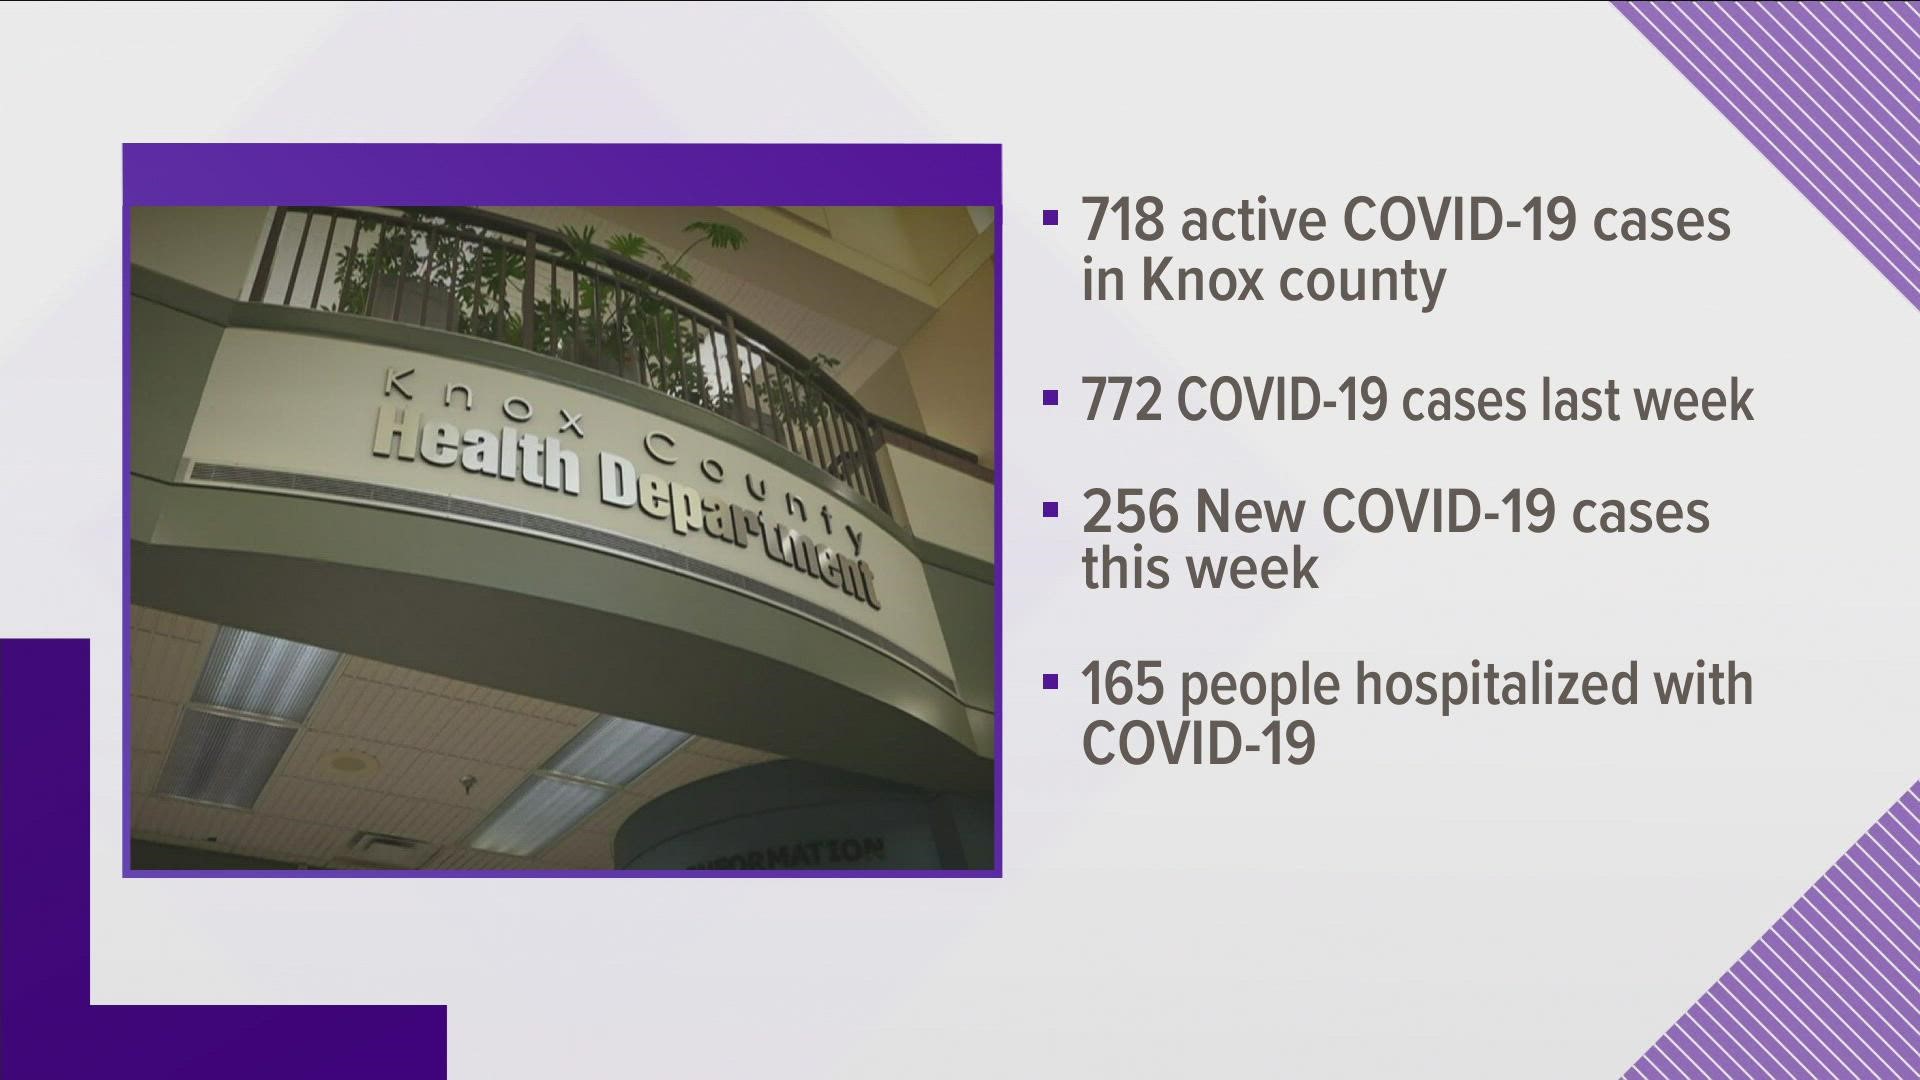 Health leaders noted  718 active COVID-19 cases. That's down almost 50 cases from last week.